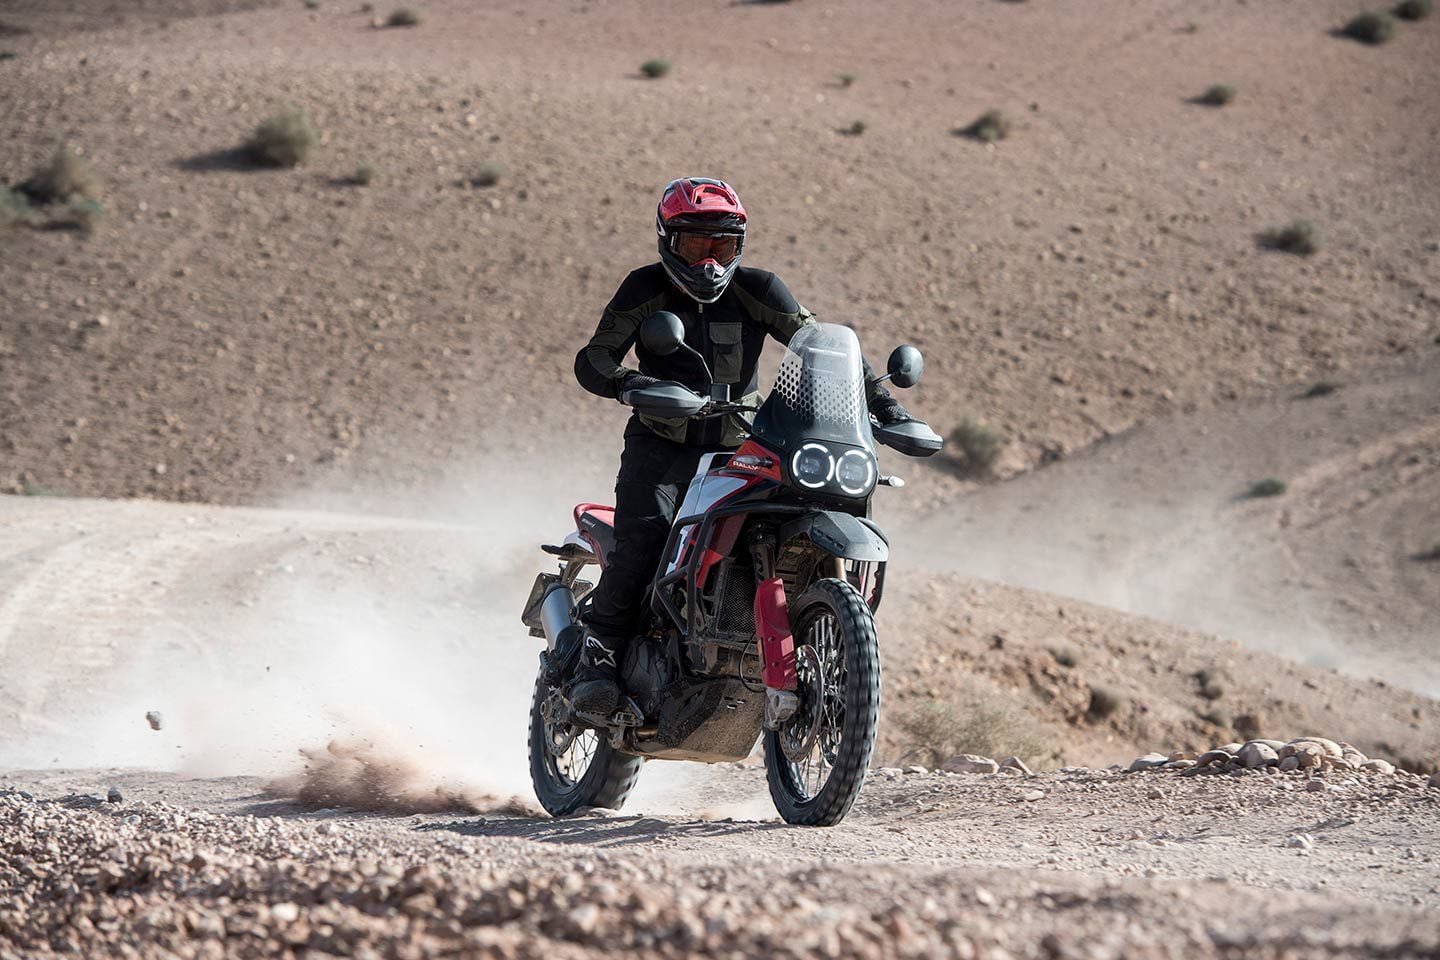 The DesertX Rally’s KYB fork and shock have excellent ground-following ability in the dirt.